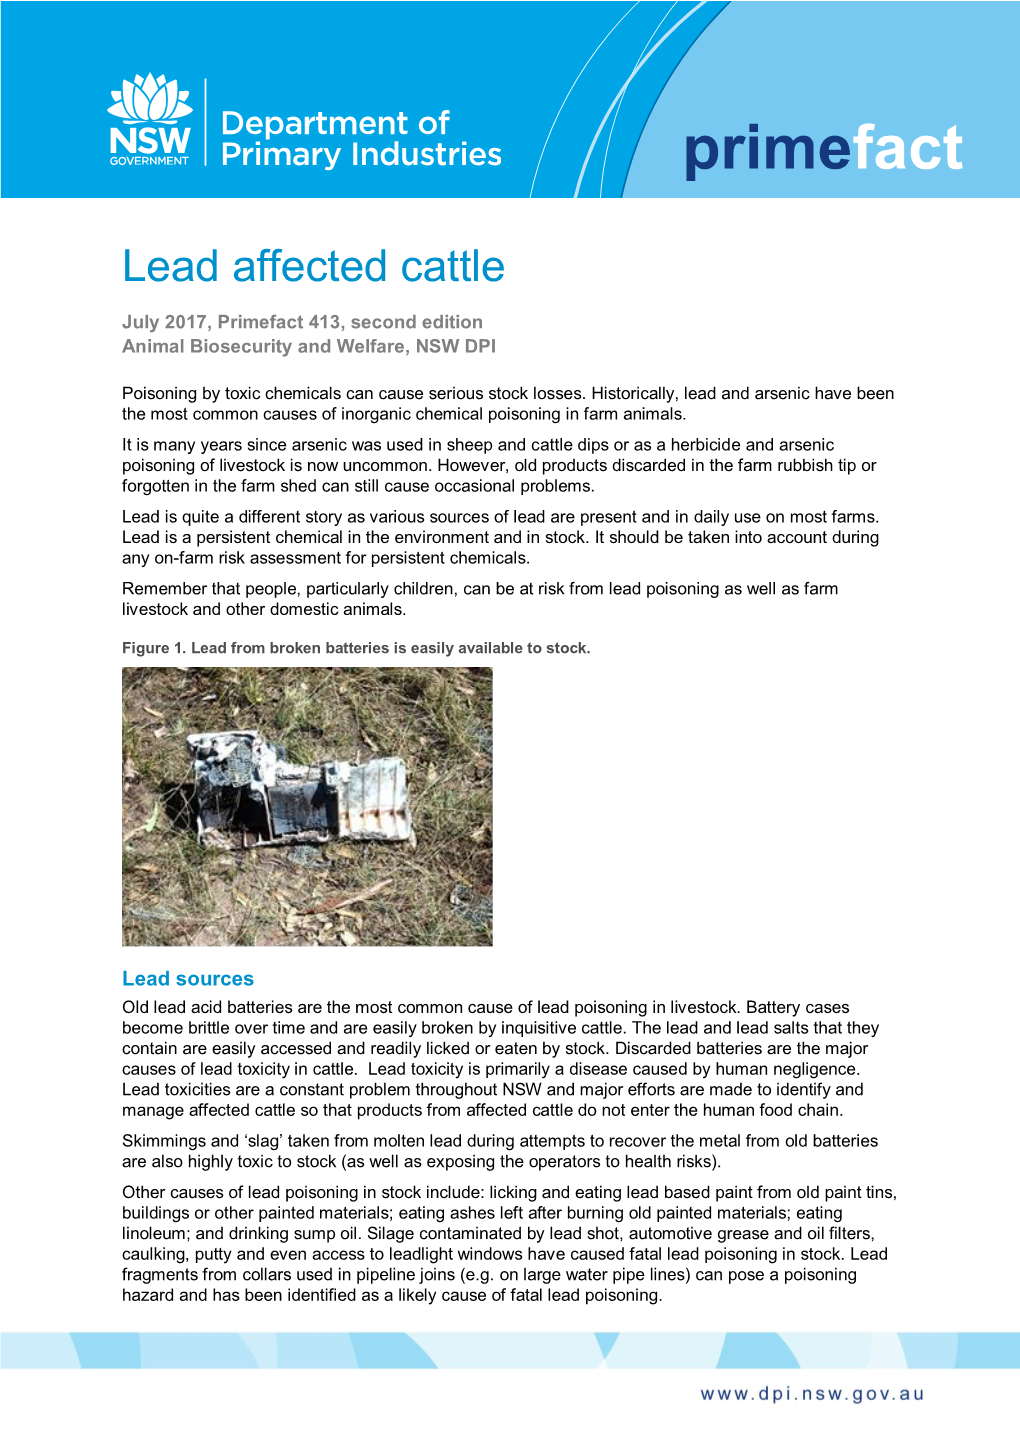 Primefact 413 “Lead Affected Cattle